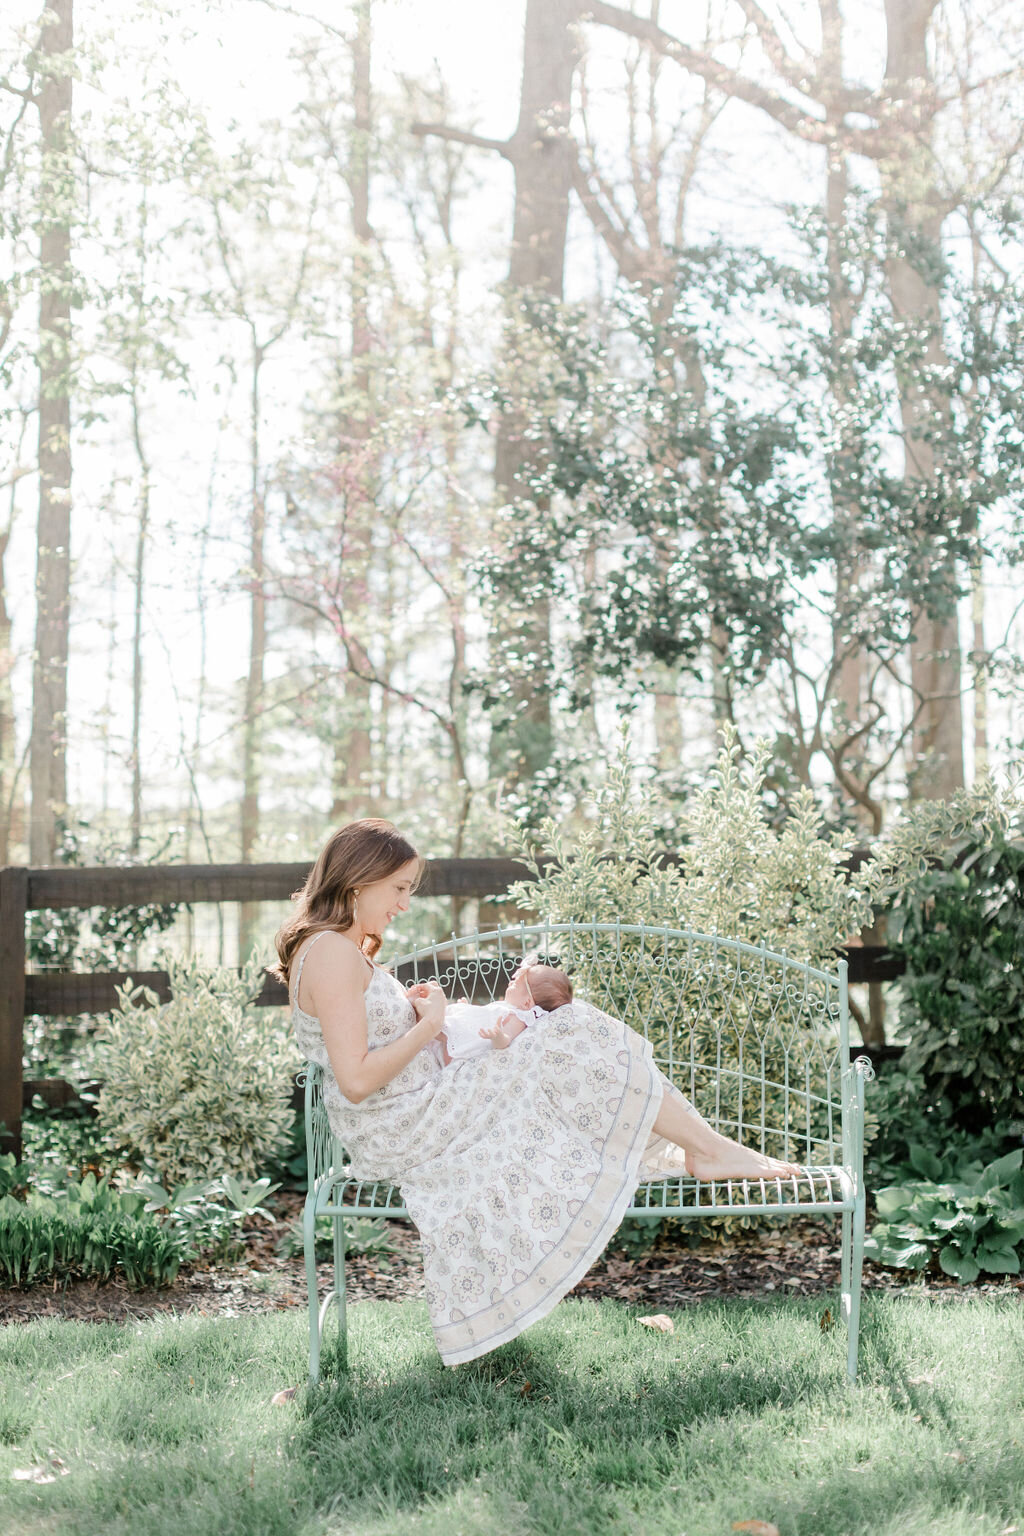 A mother looking tenderly at her newborn daughter during a lifestyle newborn session in Richmond, Virginia. This newborn session was done both indoors and outdoors to capture the true environment of the family.